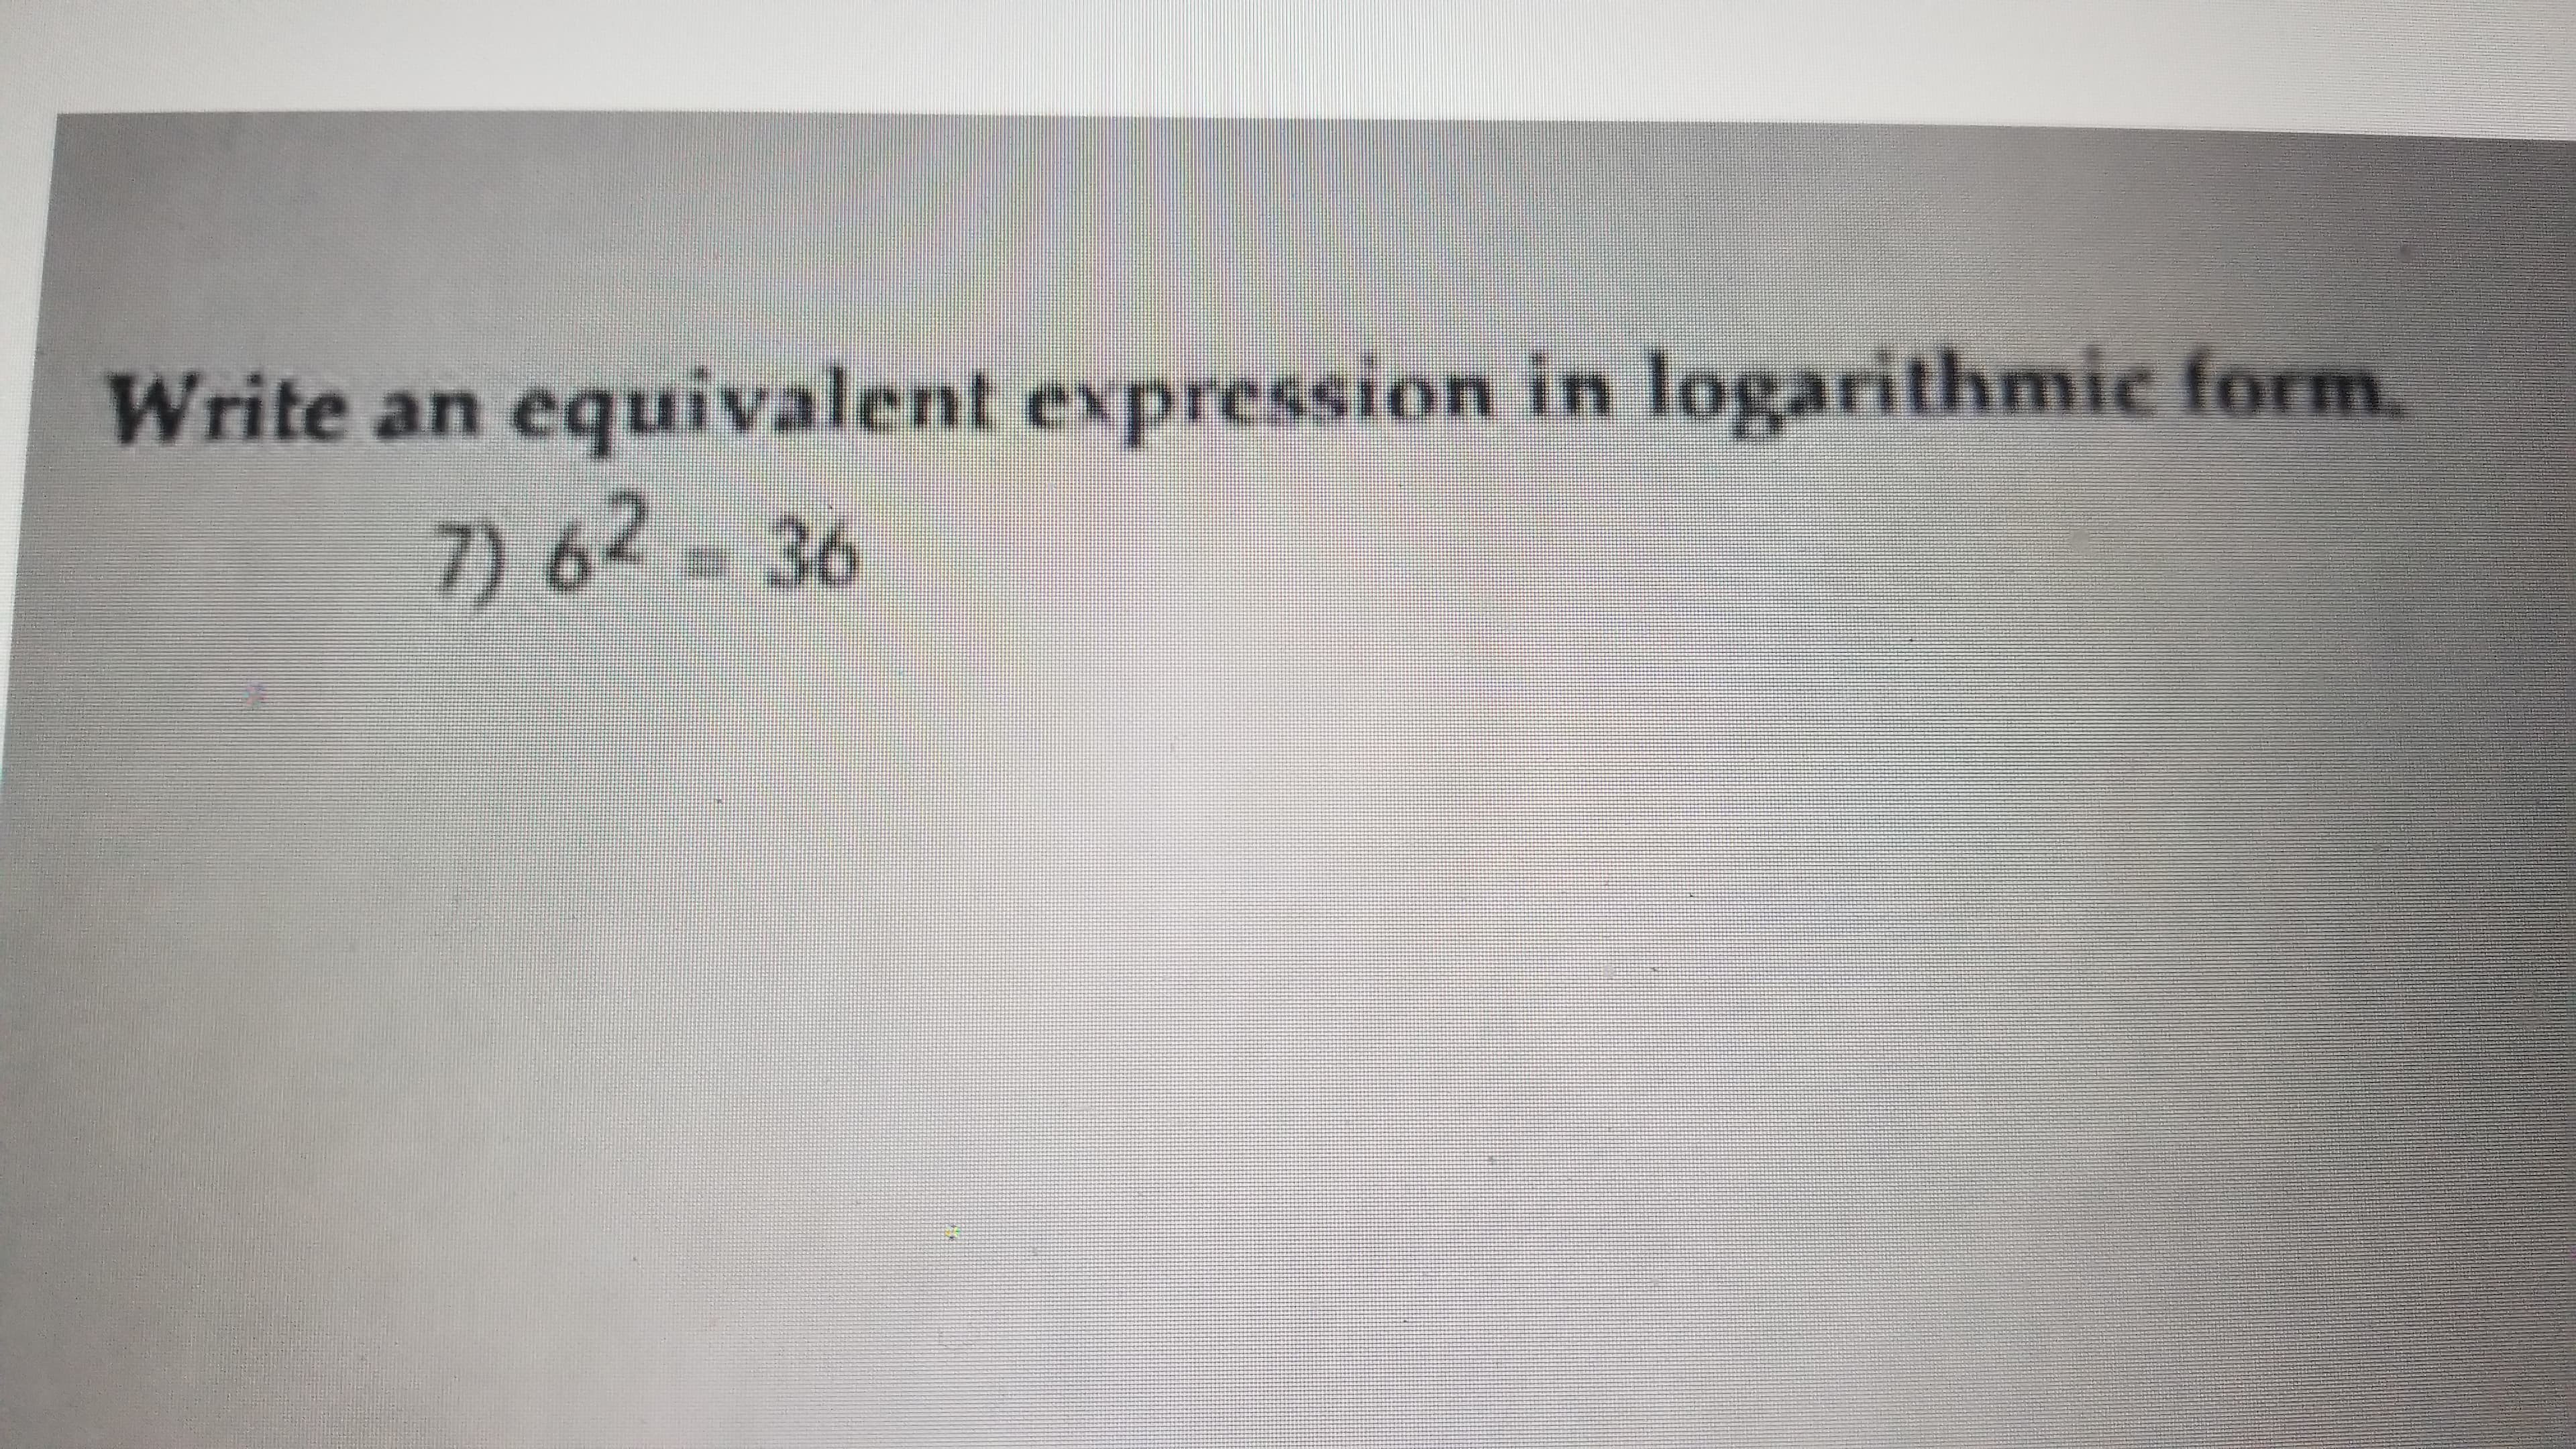 equivalent expression in logarithmic form.
7) 62-36
Write an .
